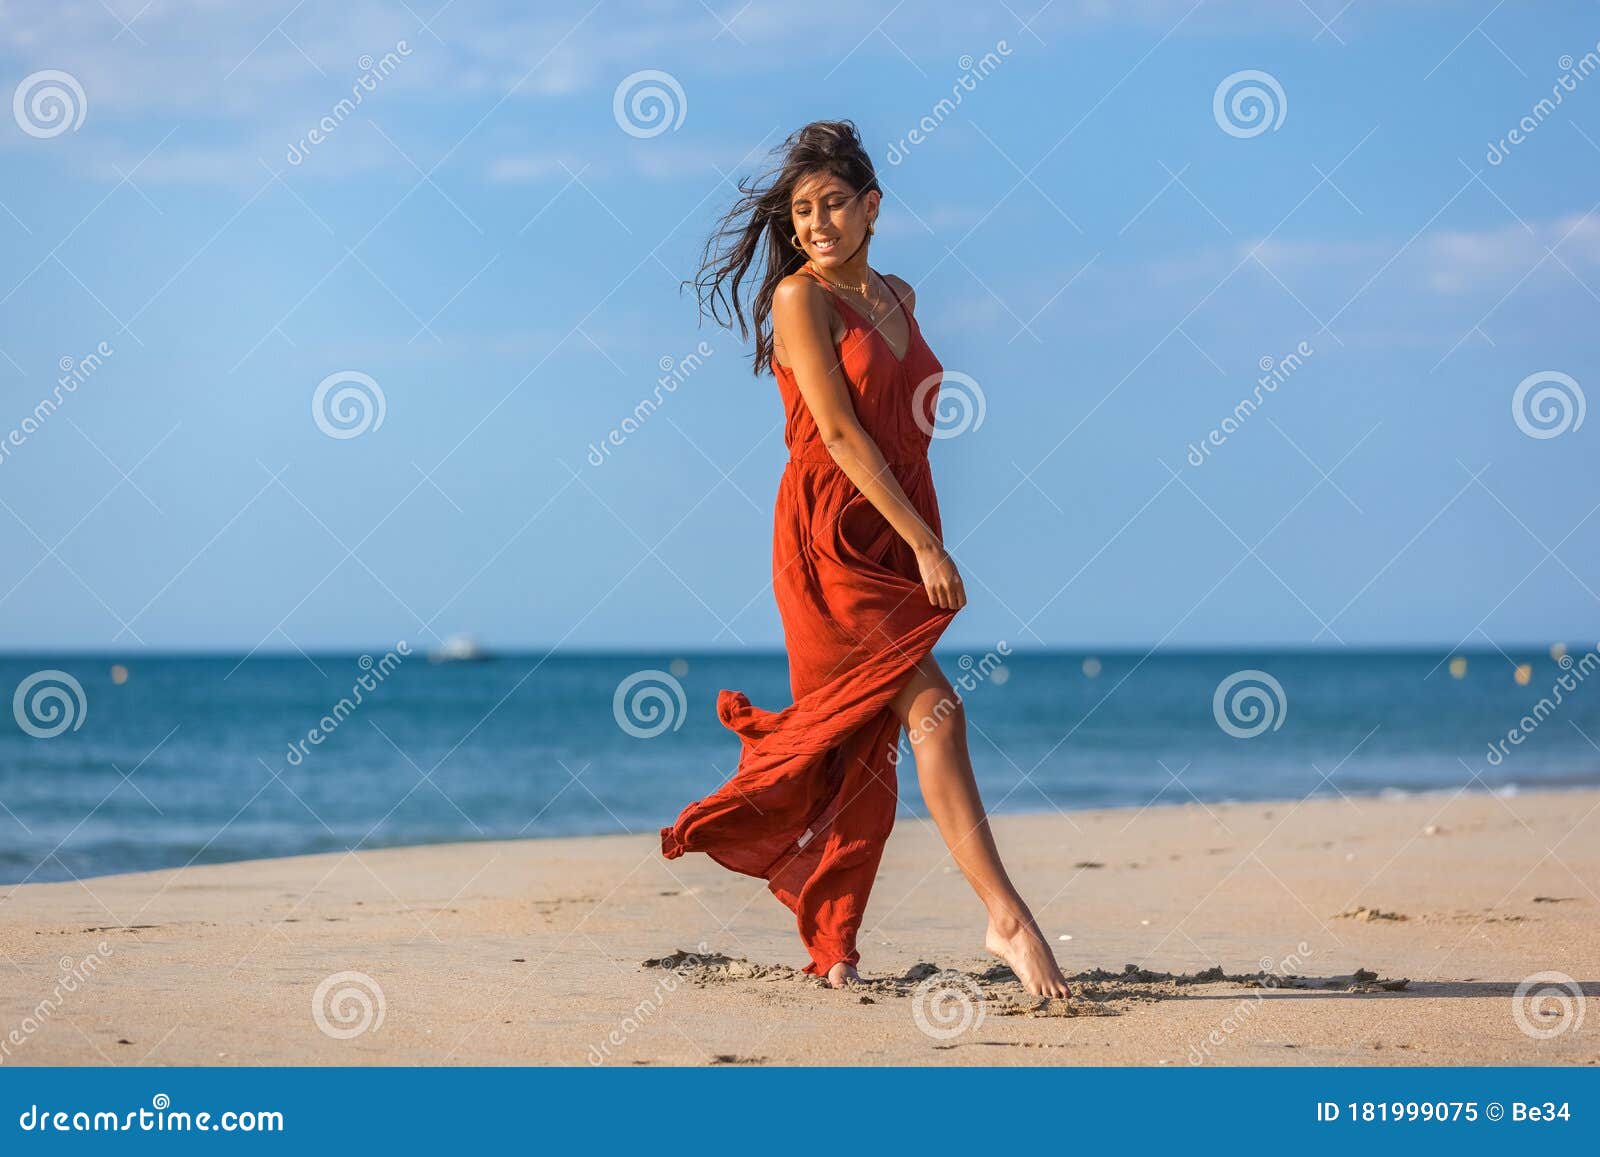 YOUNG WOMAN on the SAND of the BEACH Stock Image - Image of contemplate,  outdoor: 181999075